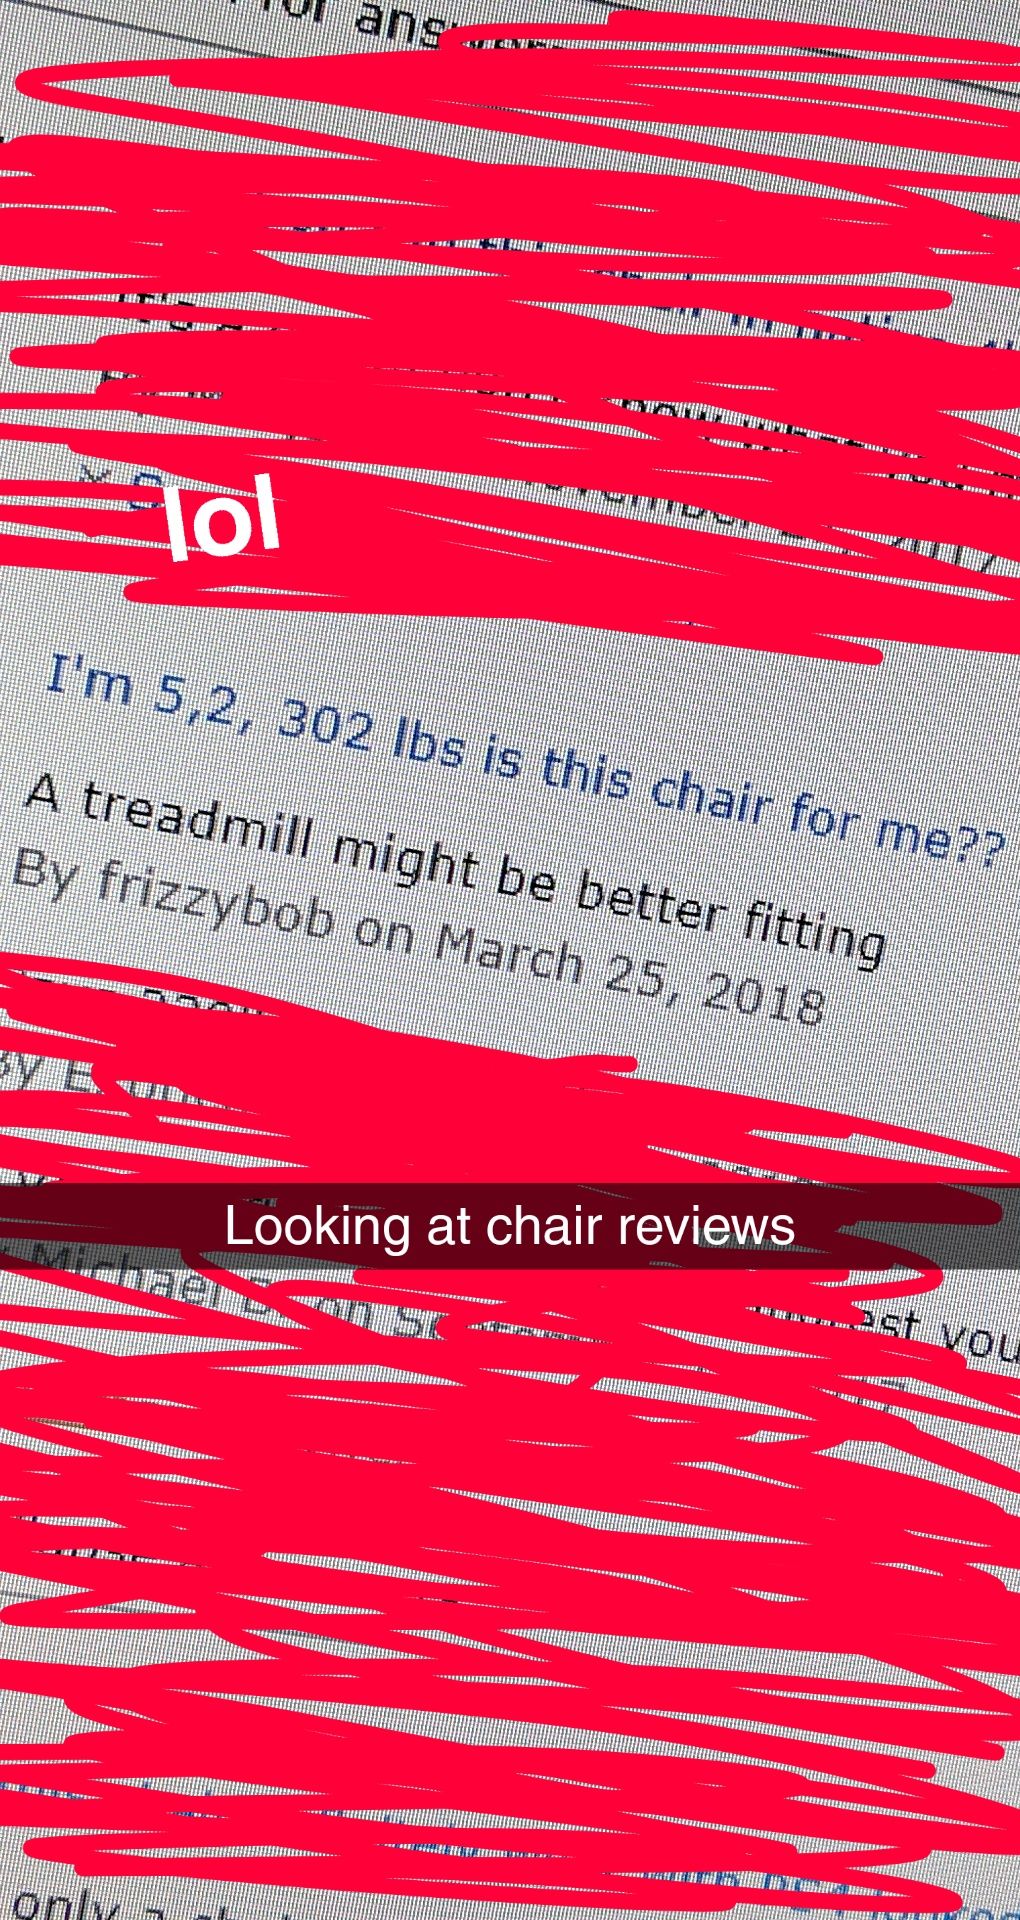 I was browsing Amazon for a new chair and I found this comment